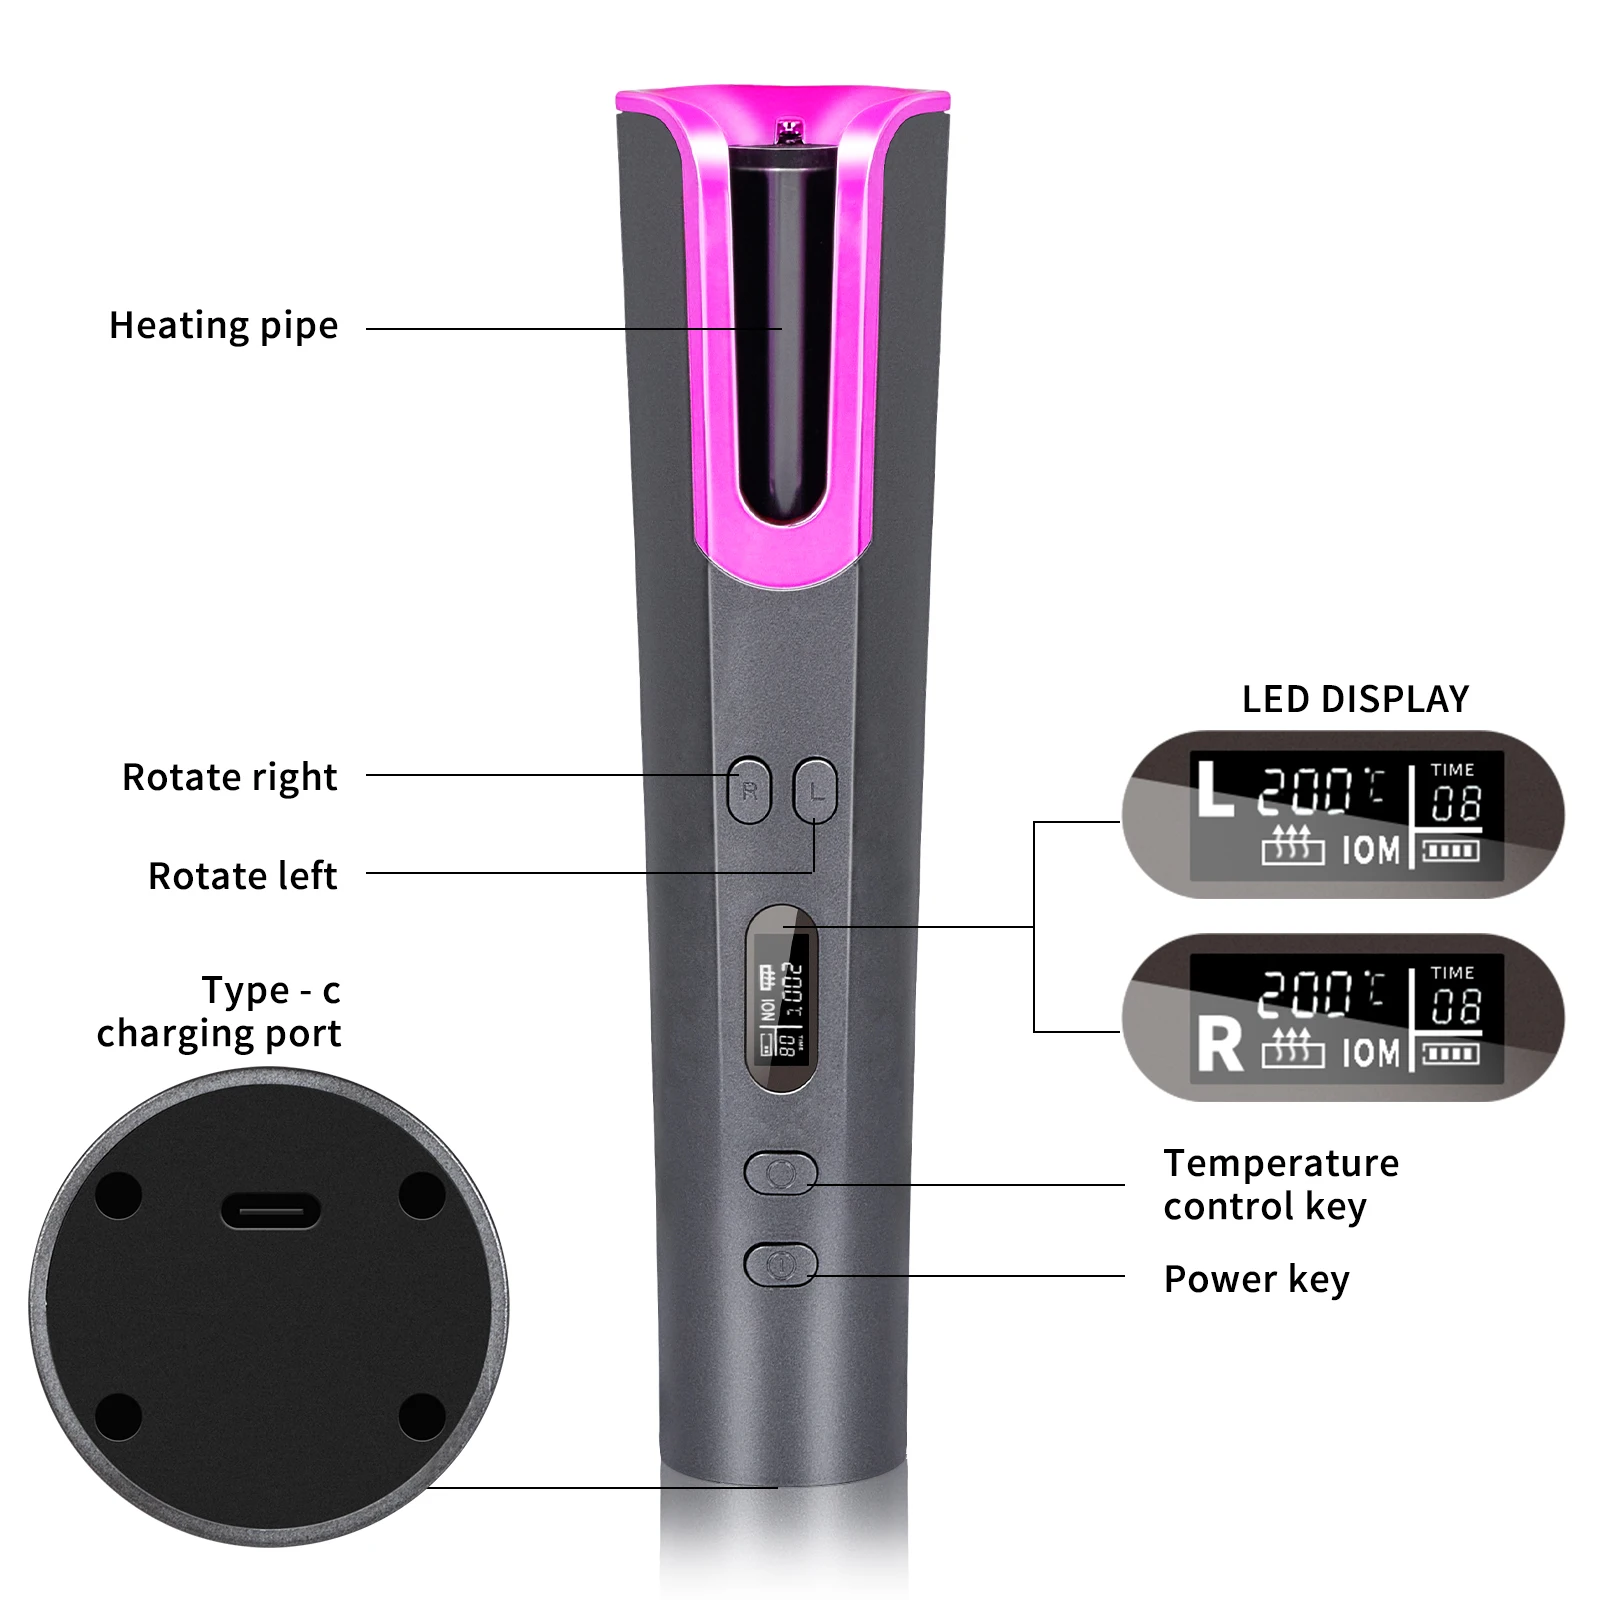 

Cordless Automatic Rotating Hair Curler USB Rechargeable Curling Iron LCD Display Temperature Adjustable Hair Curler Roller Tool, Purple